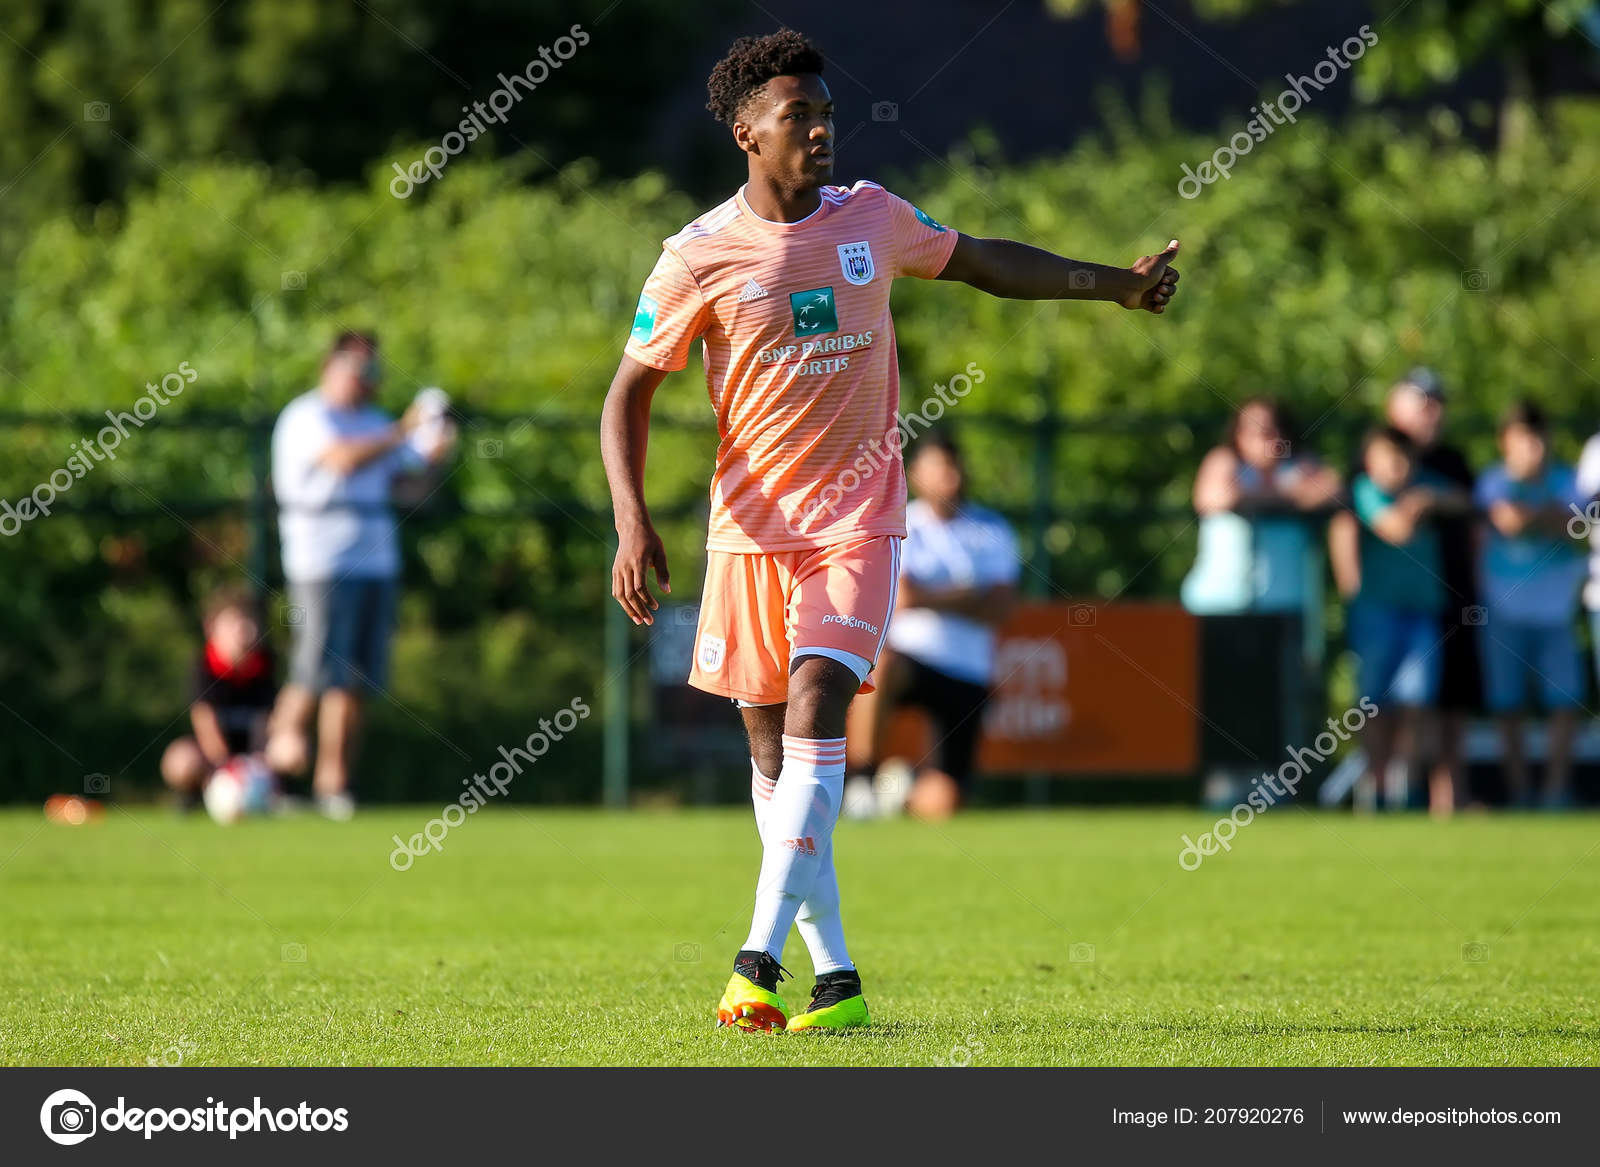 Friendly Match RSC Anderlecht Vs PAOK Editorial Photo - Image of